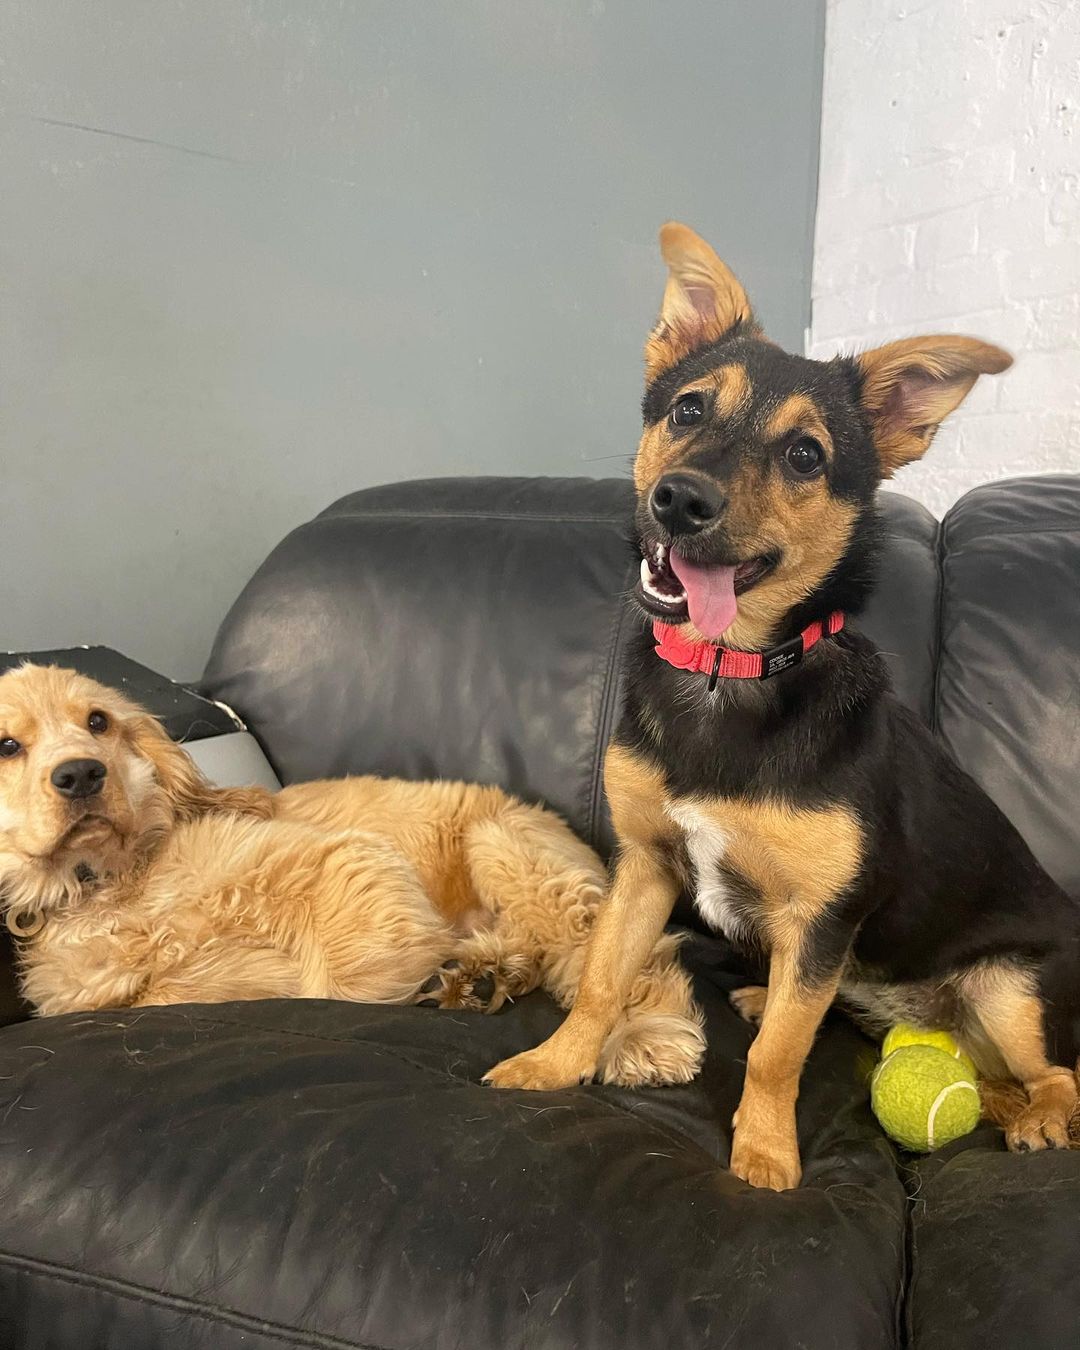 Cookie the puppy, sitting up on a black sofa, next to a chill blondy dog lying down. Cookie looks beside herself with happiness, smiling at the camera with her tongue out at a jaunty angle. She's stolen two tennis balls and has them sat underneath her